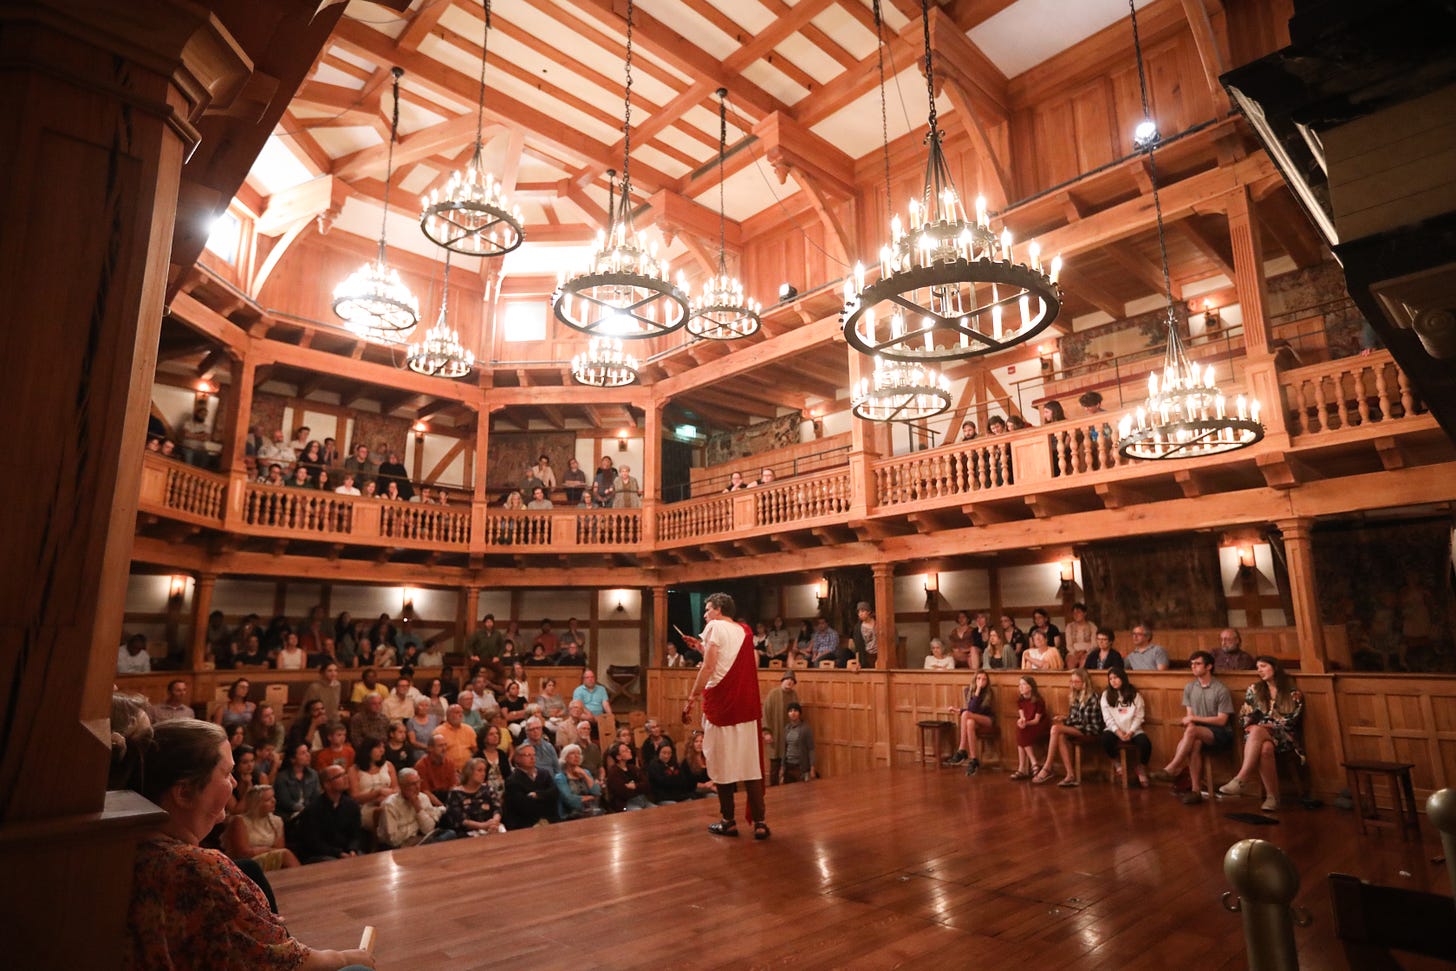 Interior of the Blackfriars Playhouse, a largely-wooden reconstructed Elizabethan indoor theatre, during a production of Julius Caesar.